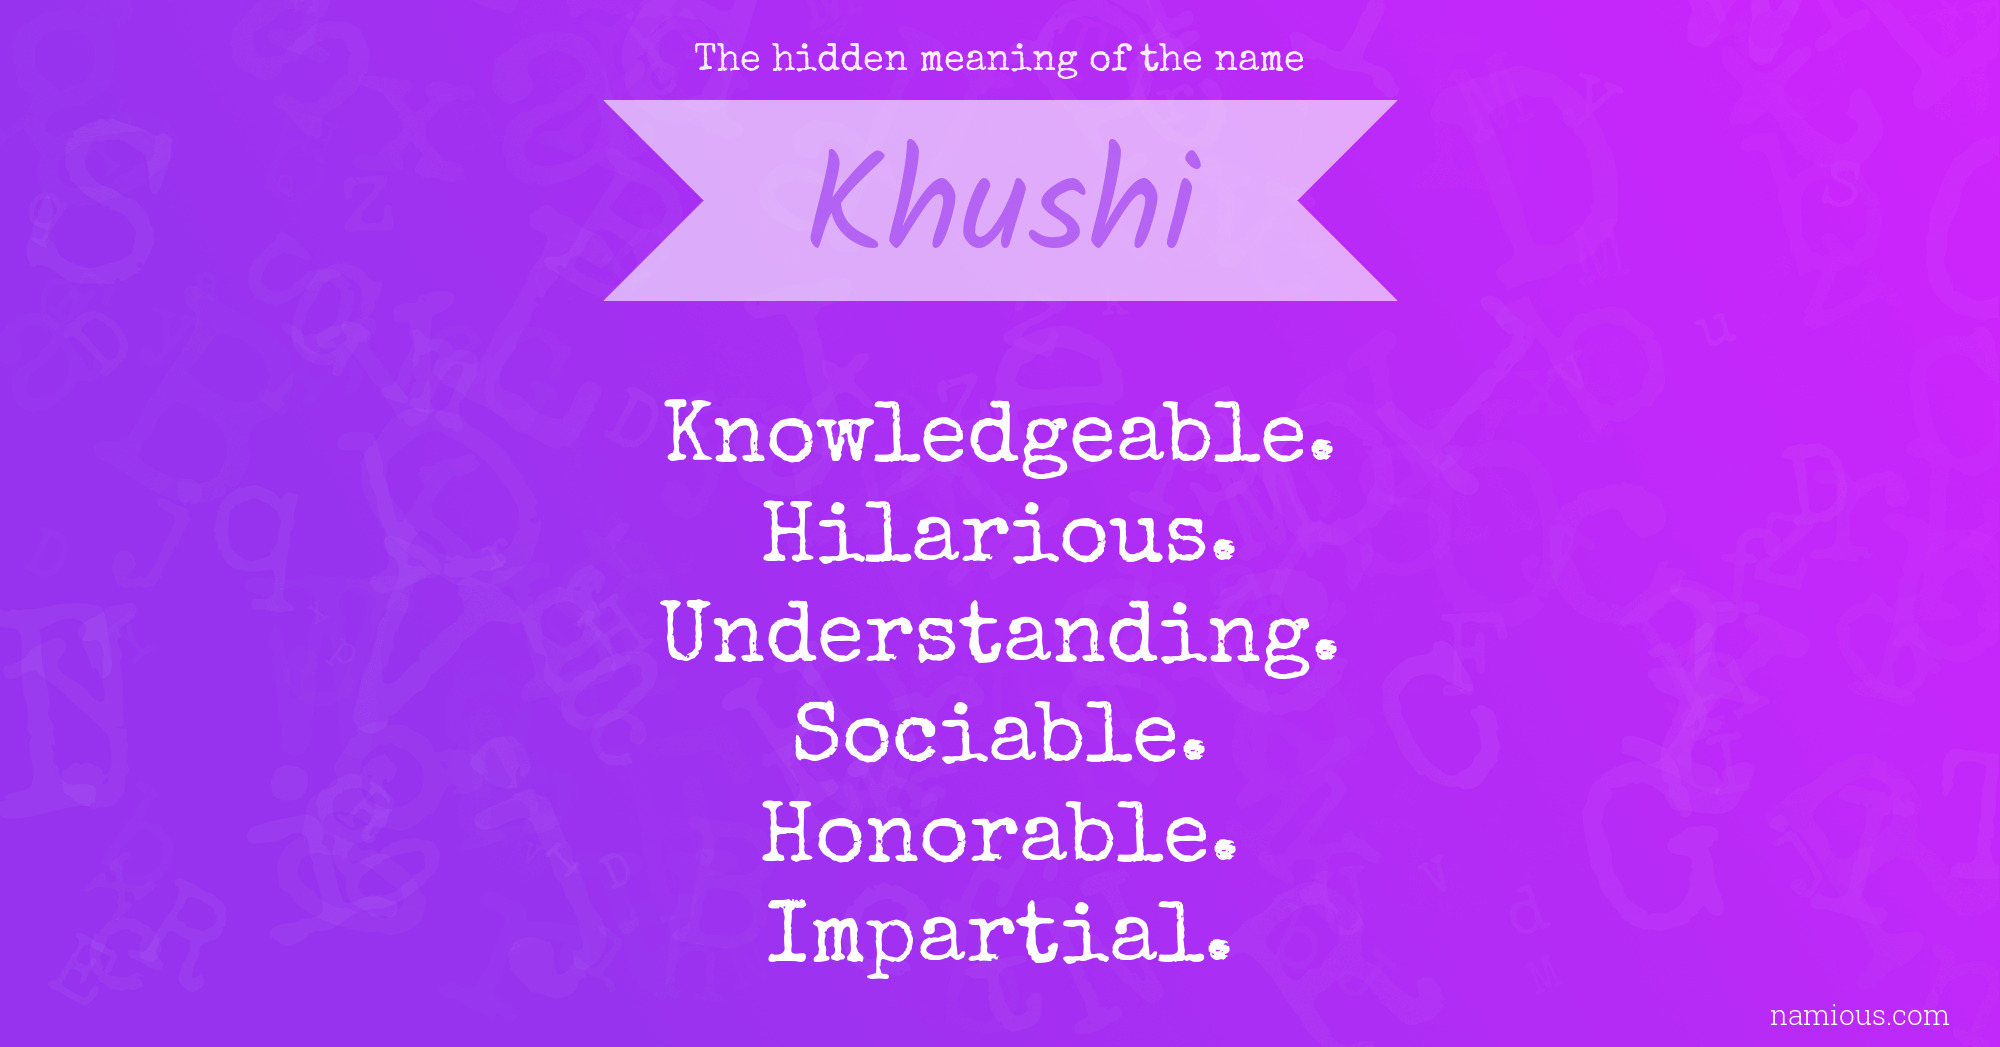 The hidden meaning of the name Khushi